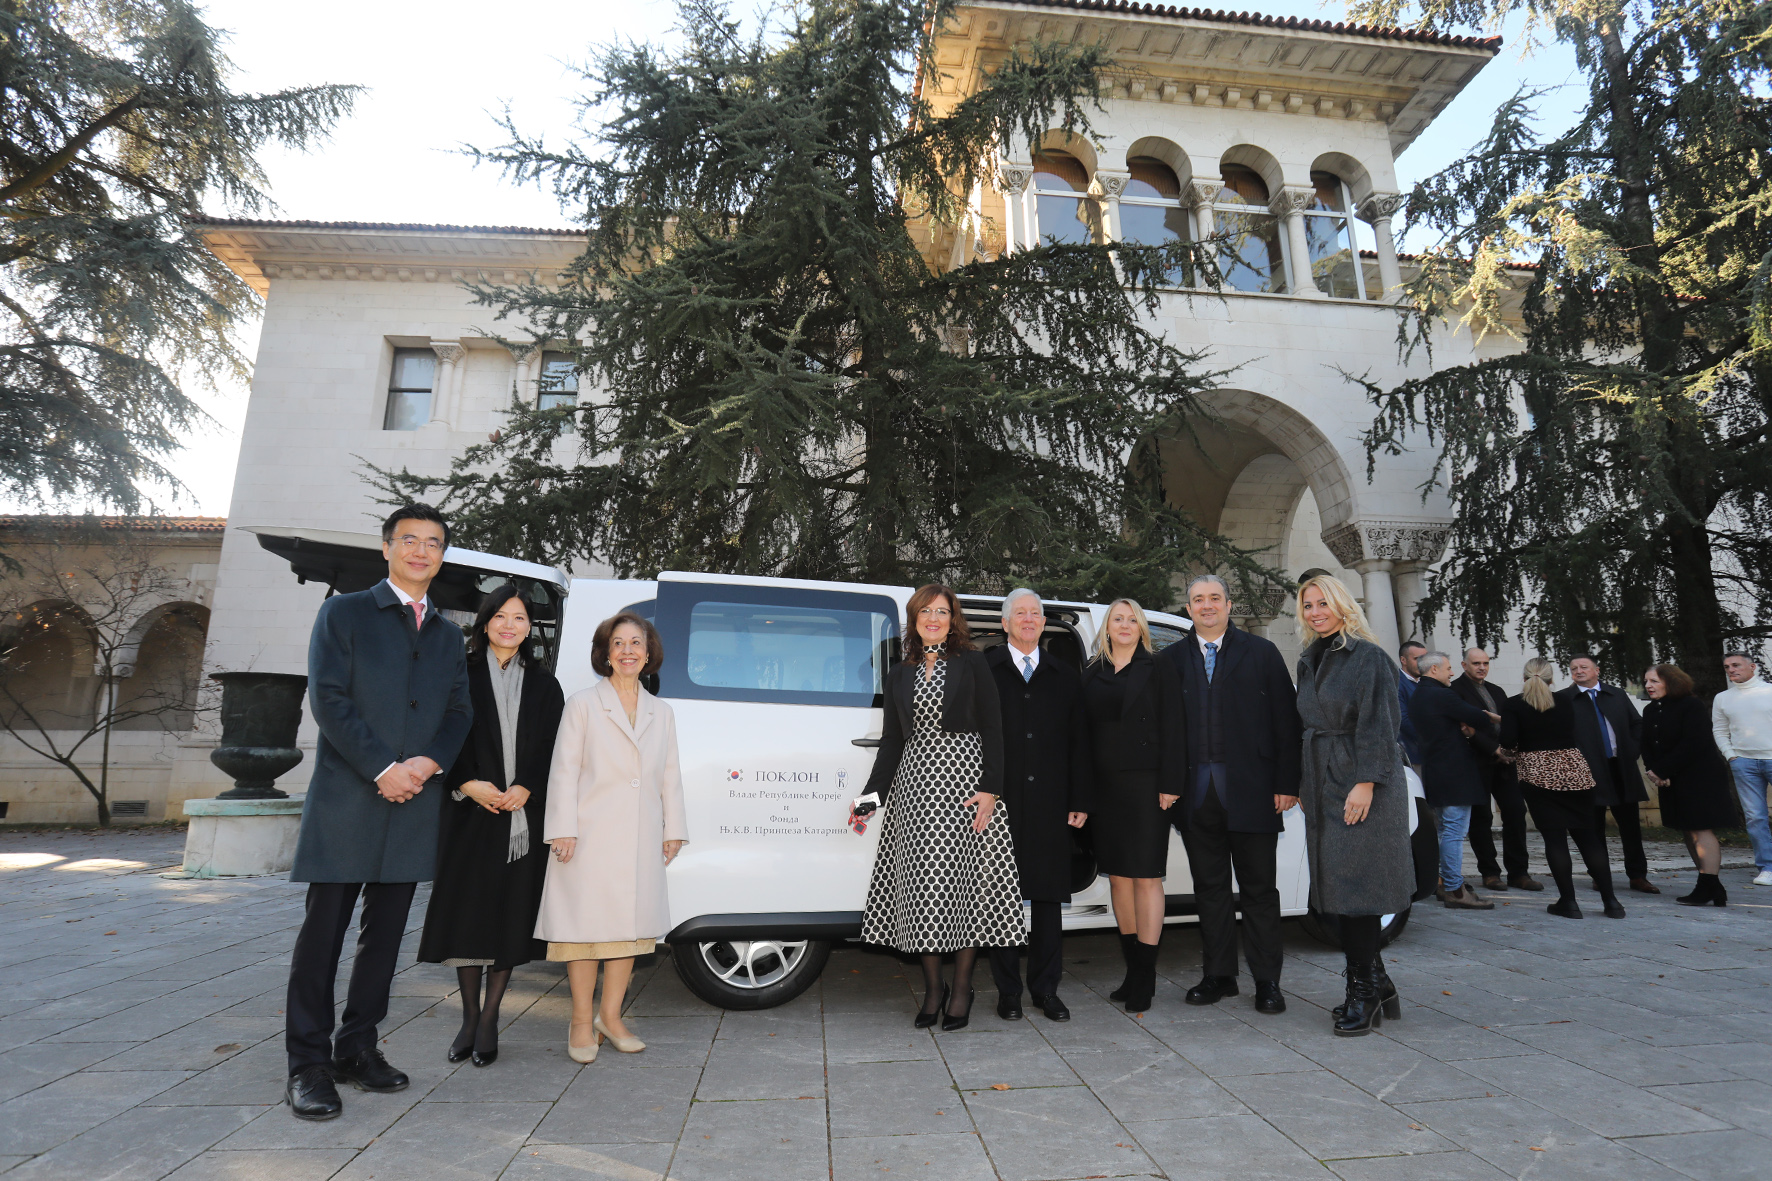 REPUBLIC OF KOREA AND CROWN PRINCESS DELIVER AID TO SERBIAN HOSPITALS